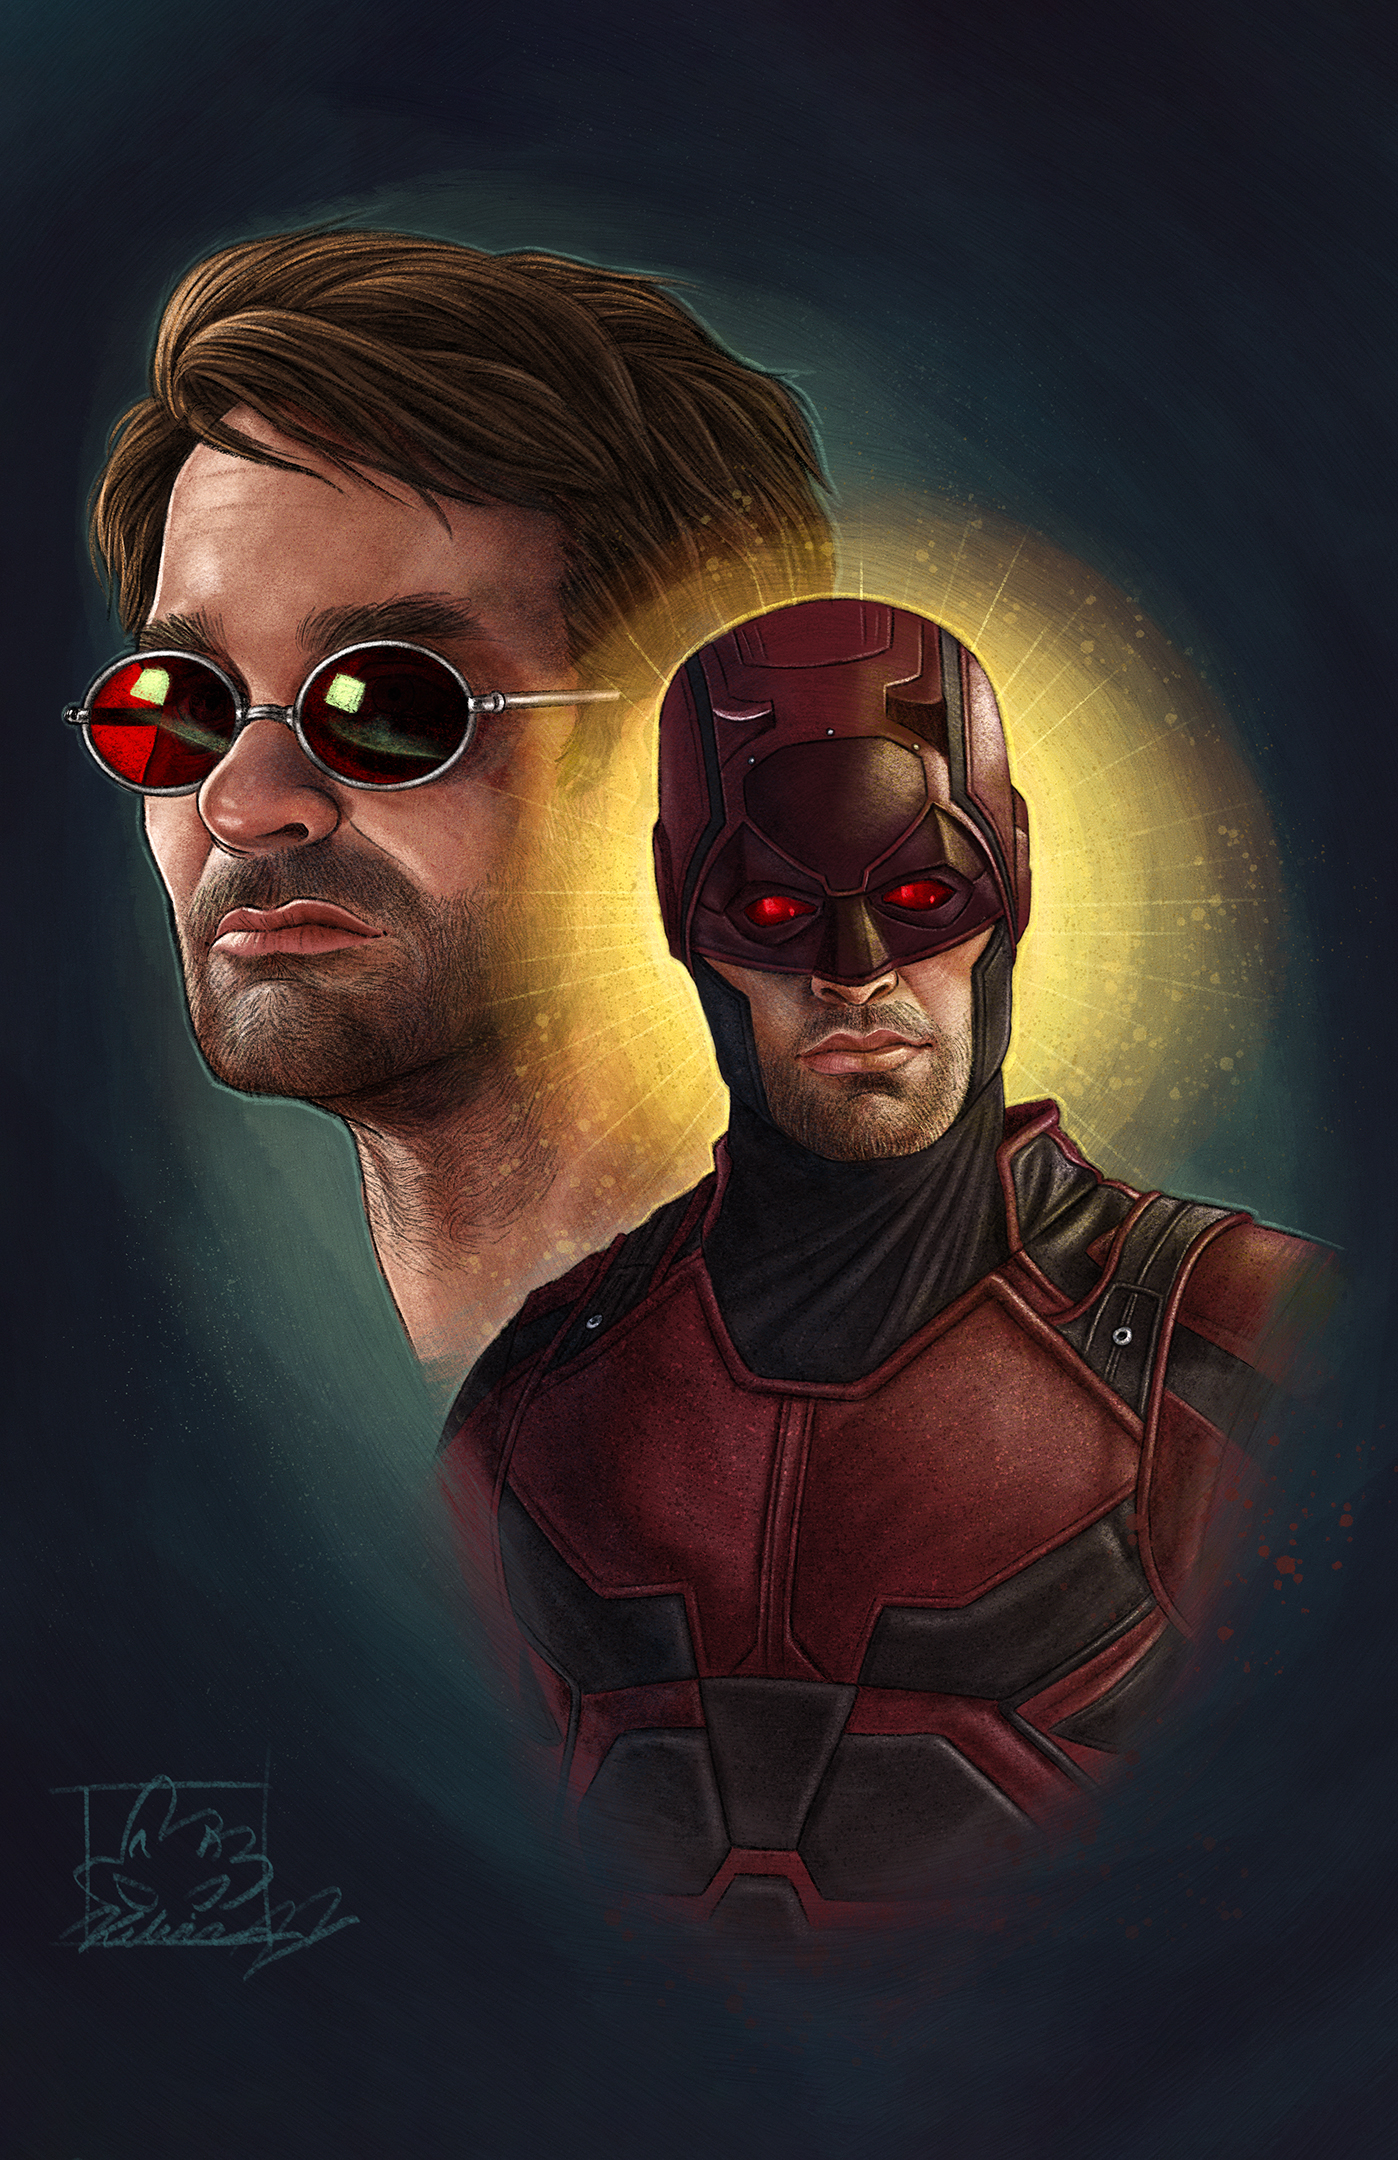 Daredevil: The Man Without Fear